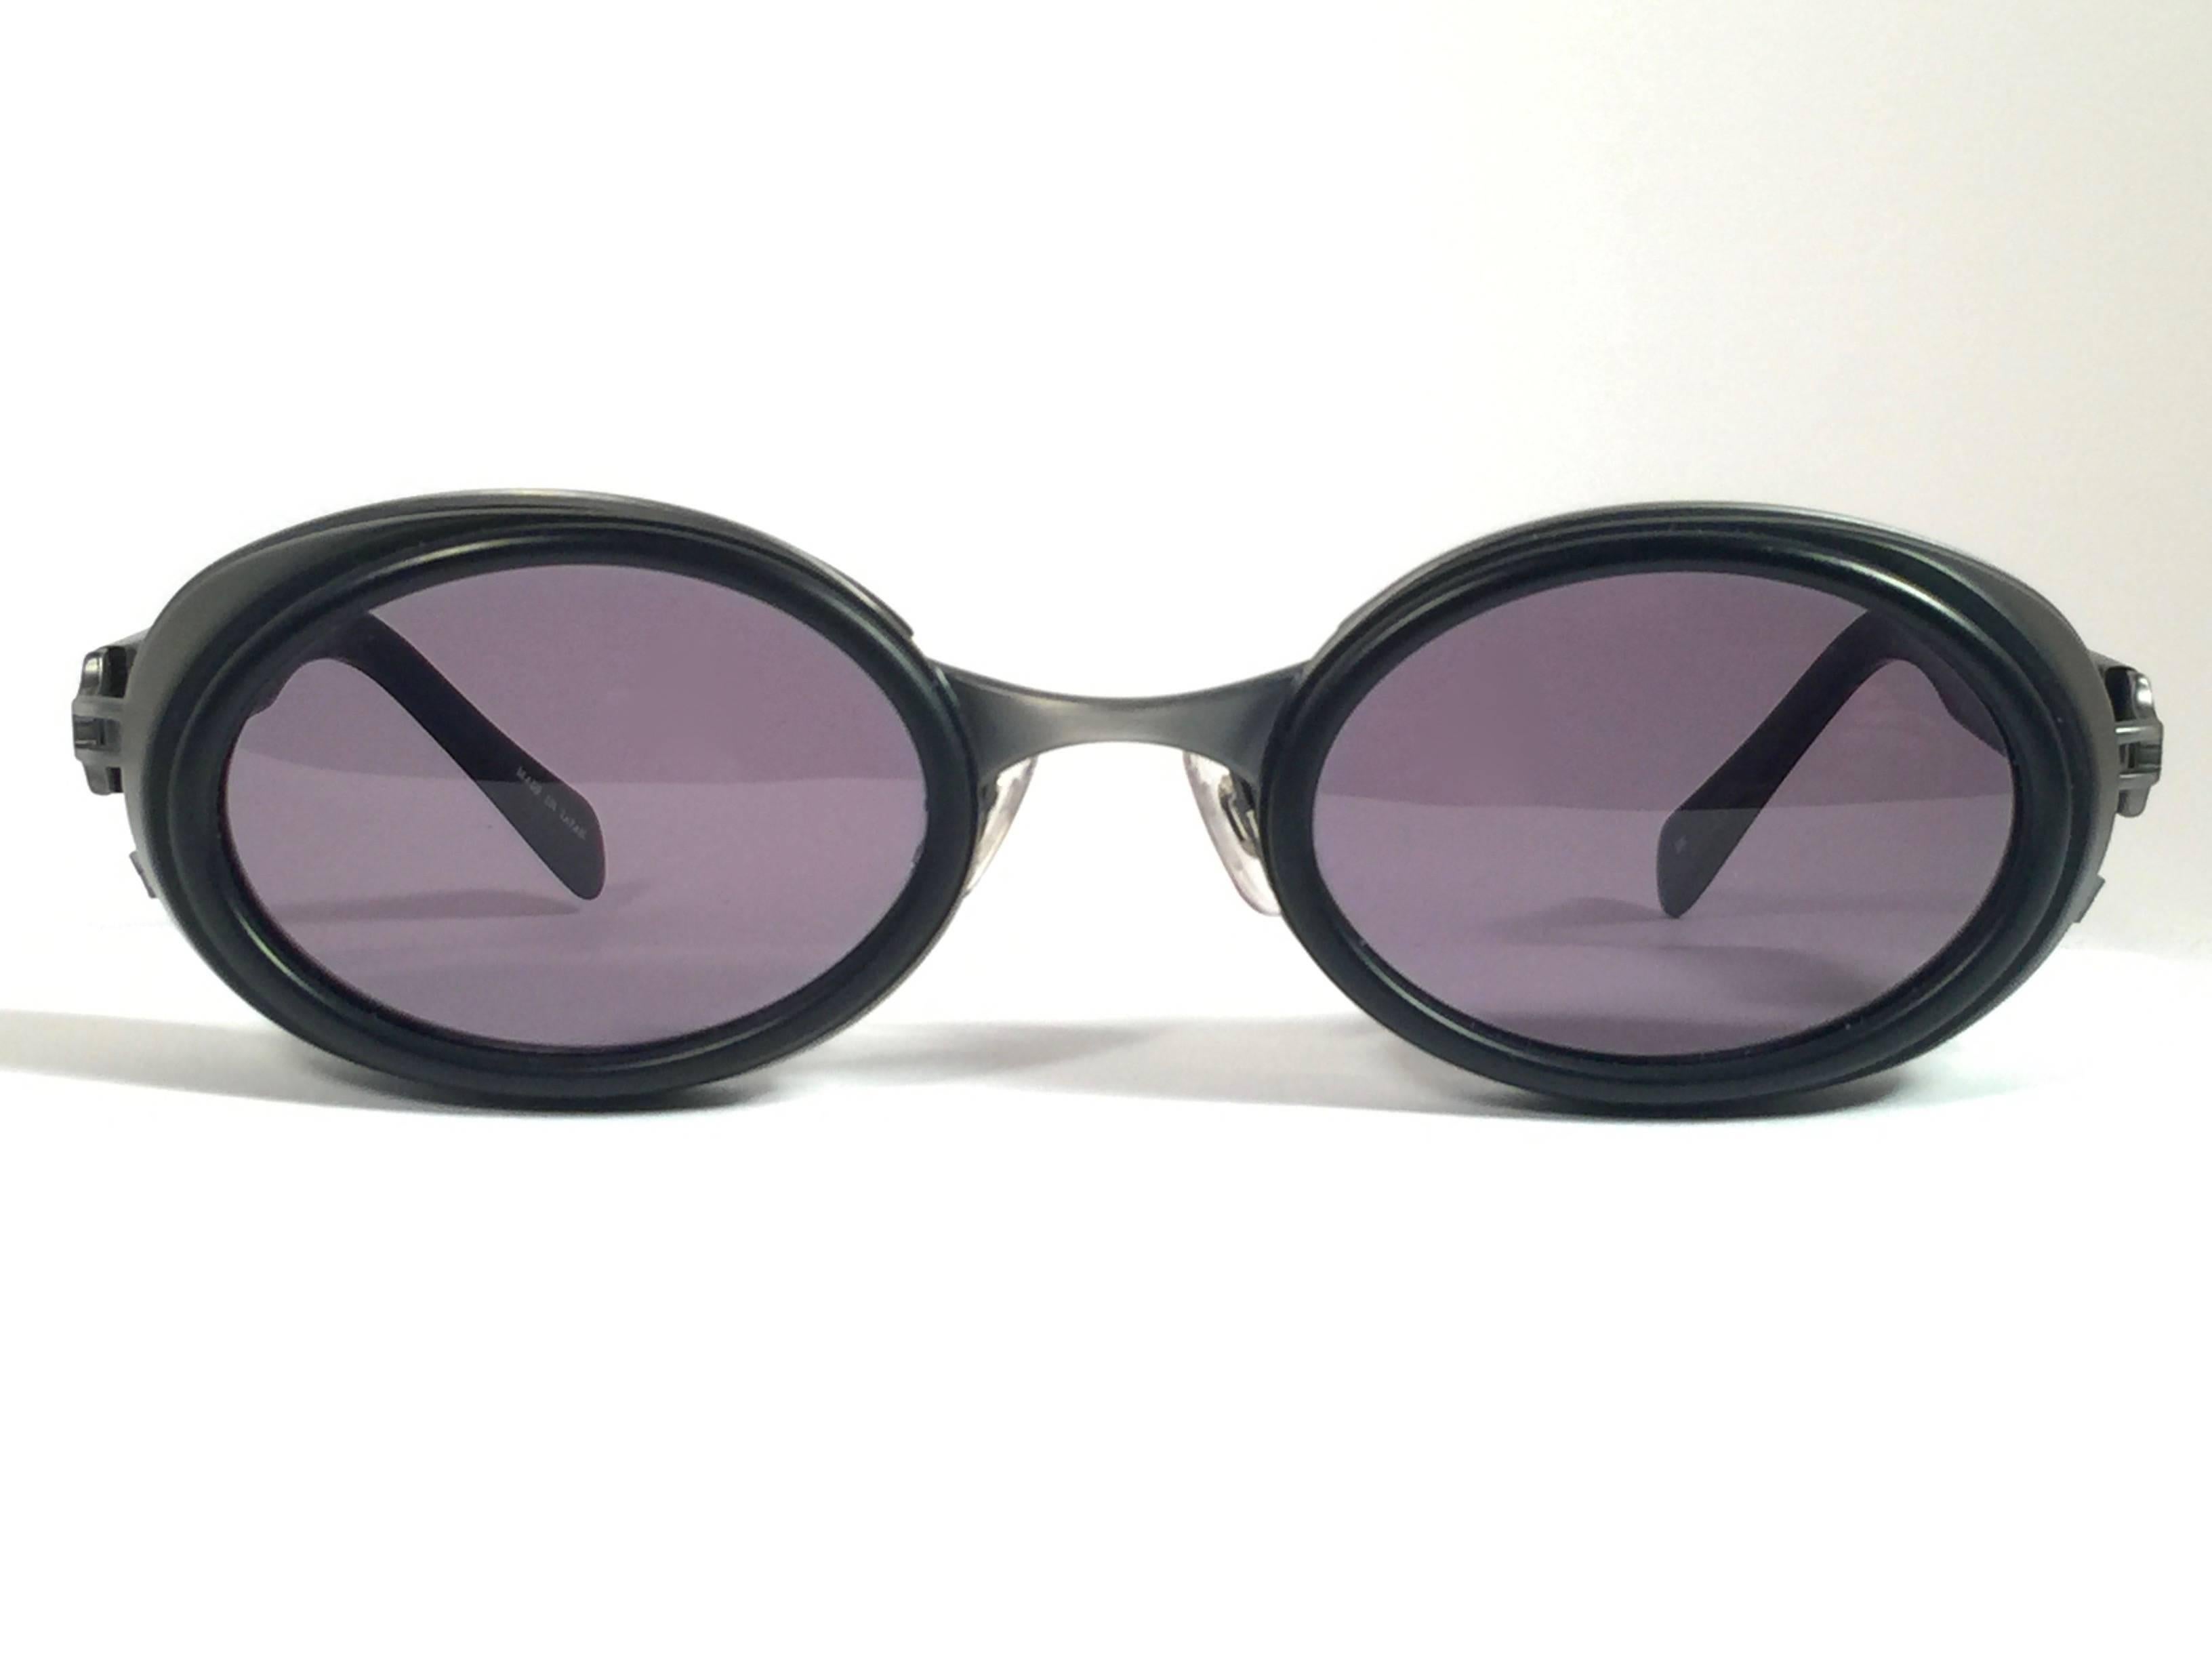 Cult brand Matsuda signed this ultra chic pair of matte black oval with silver accents sunglasses. 

Spotless G15 grey lenses.

Superior quality and design. 

New, never worn or displayed. Made in japan.

MEASUREMENTS 


FRONT : 13 CMS 

LENS HEIGHT